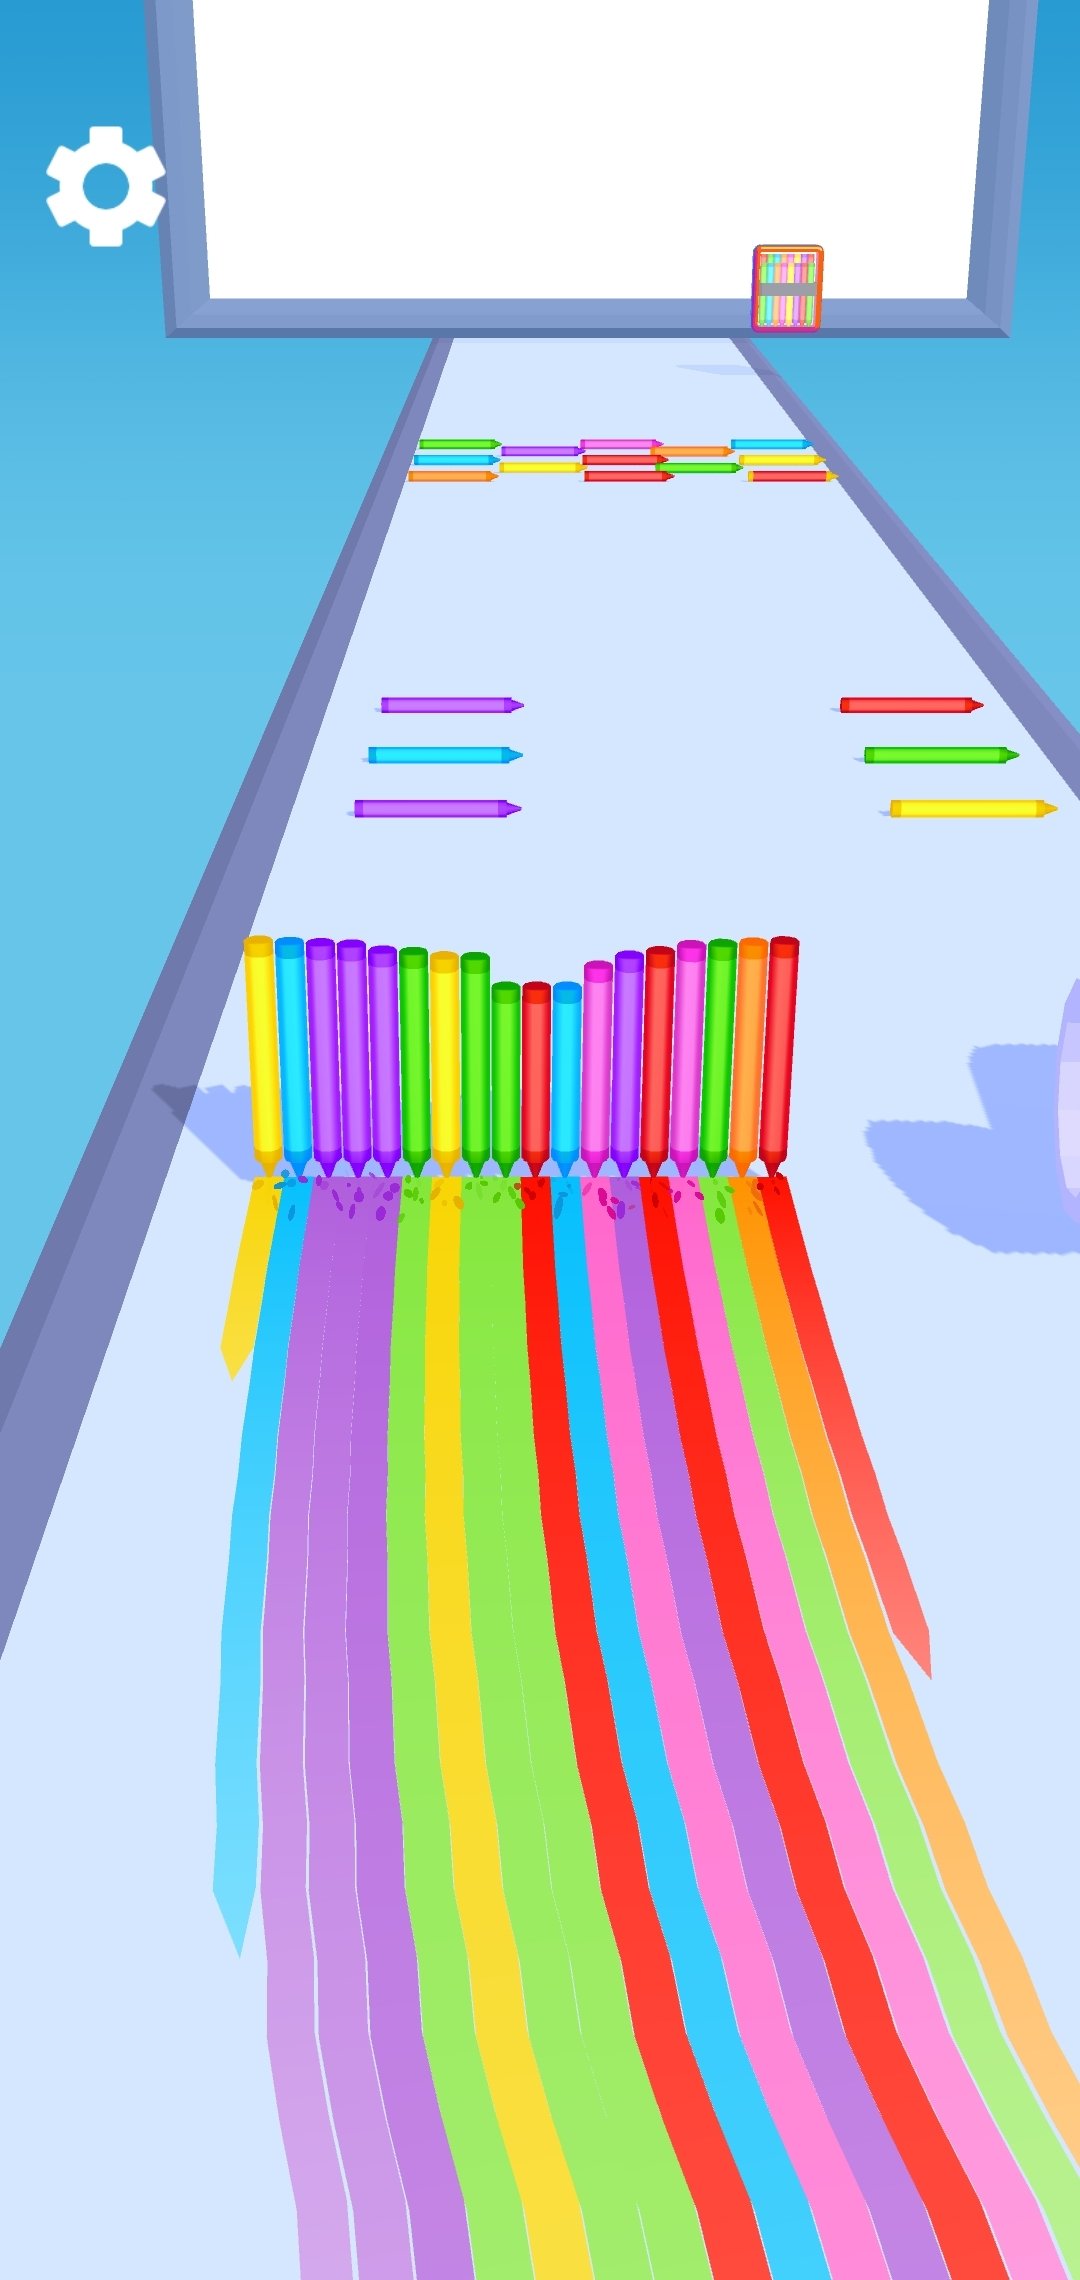 Pencil Rush 3D Mod Apk v0.6.0: How to Play, Download and Install?